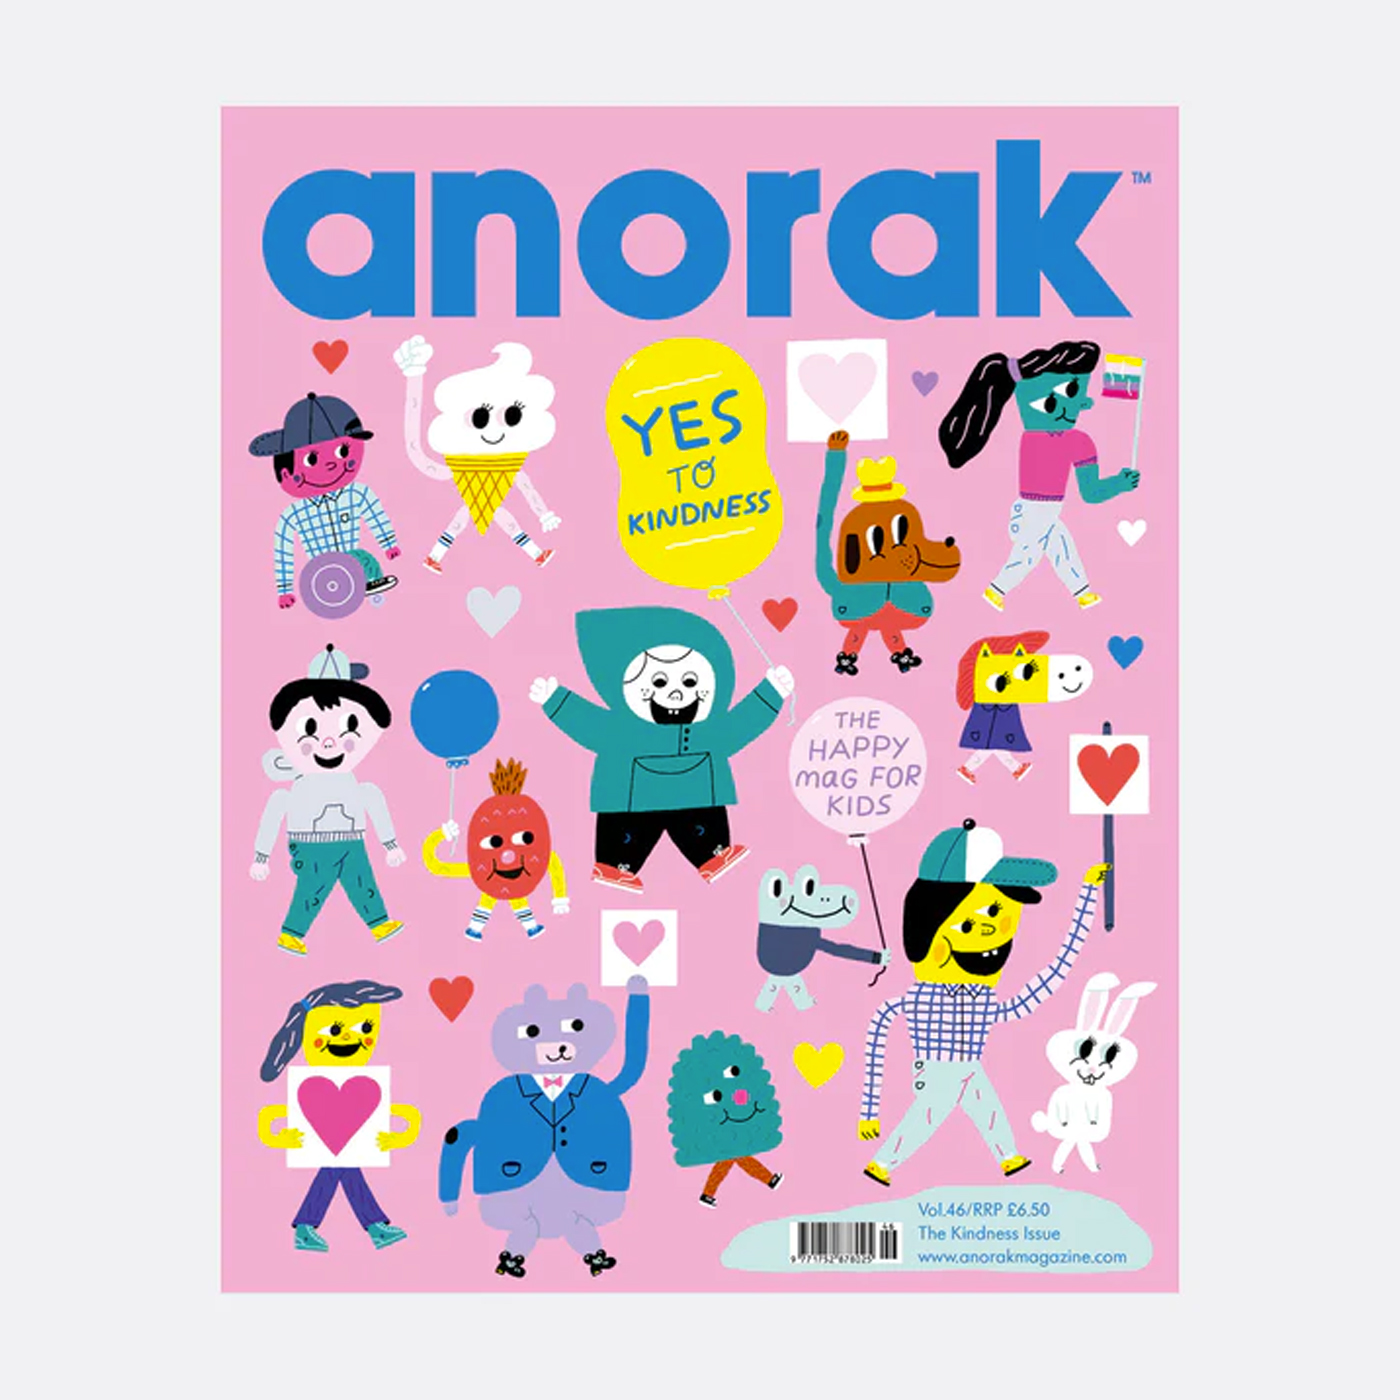  Anorak - The Kindness Issue Vol.46